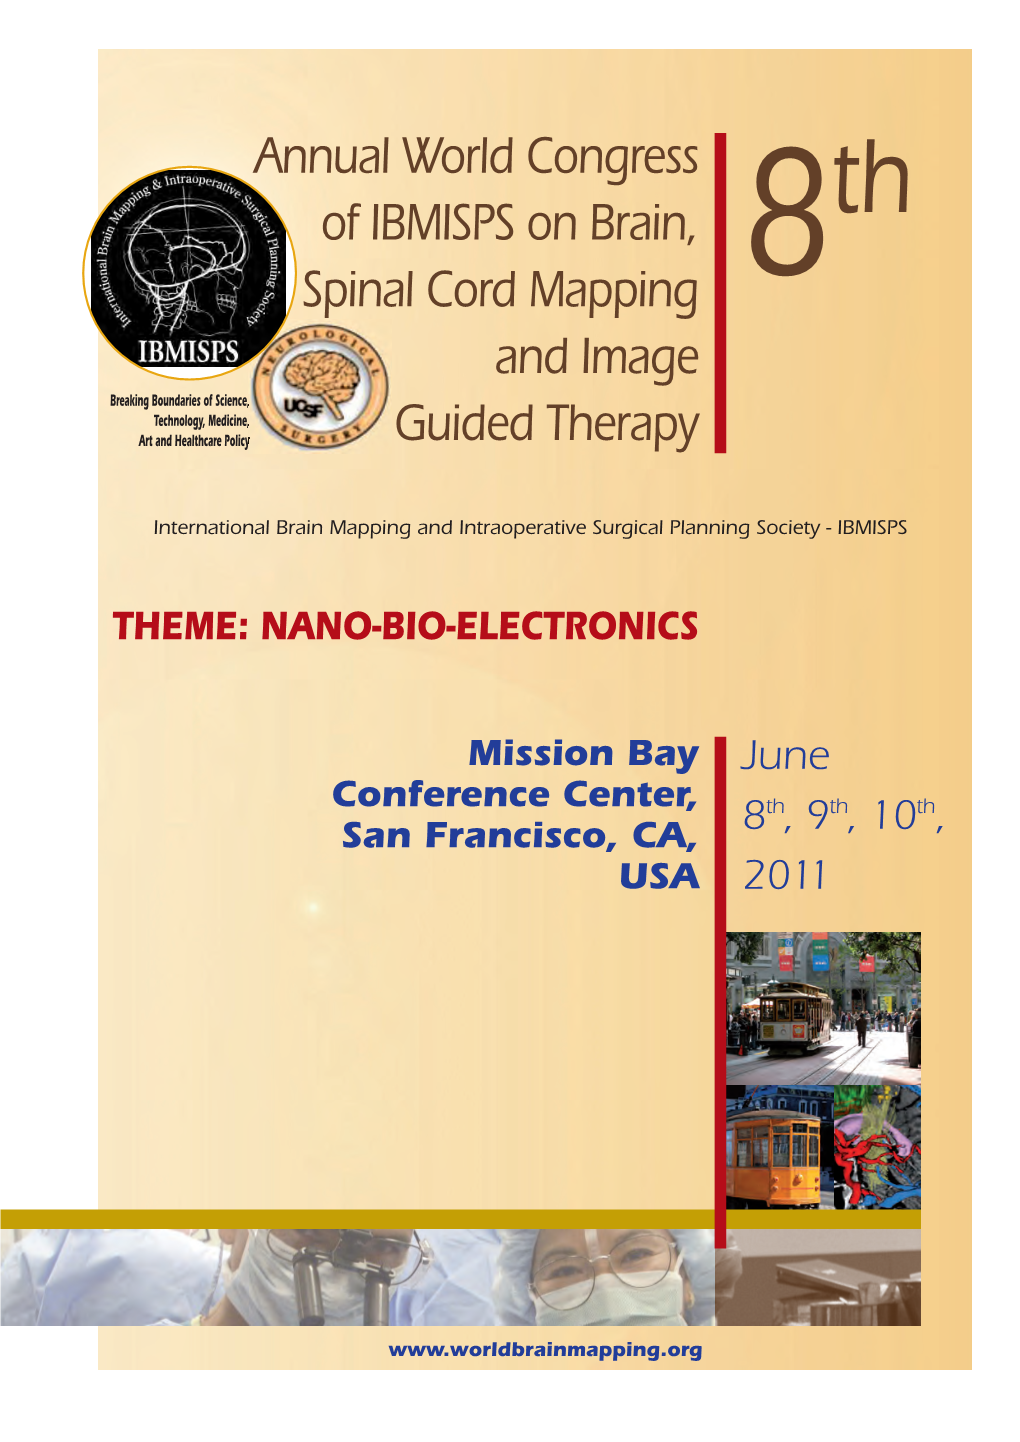 Annual World Congress of IBMISPS on Brain, Spinal Cord Mapping And